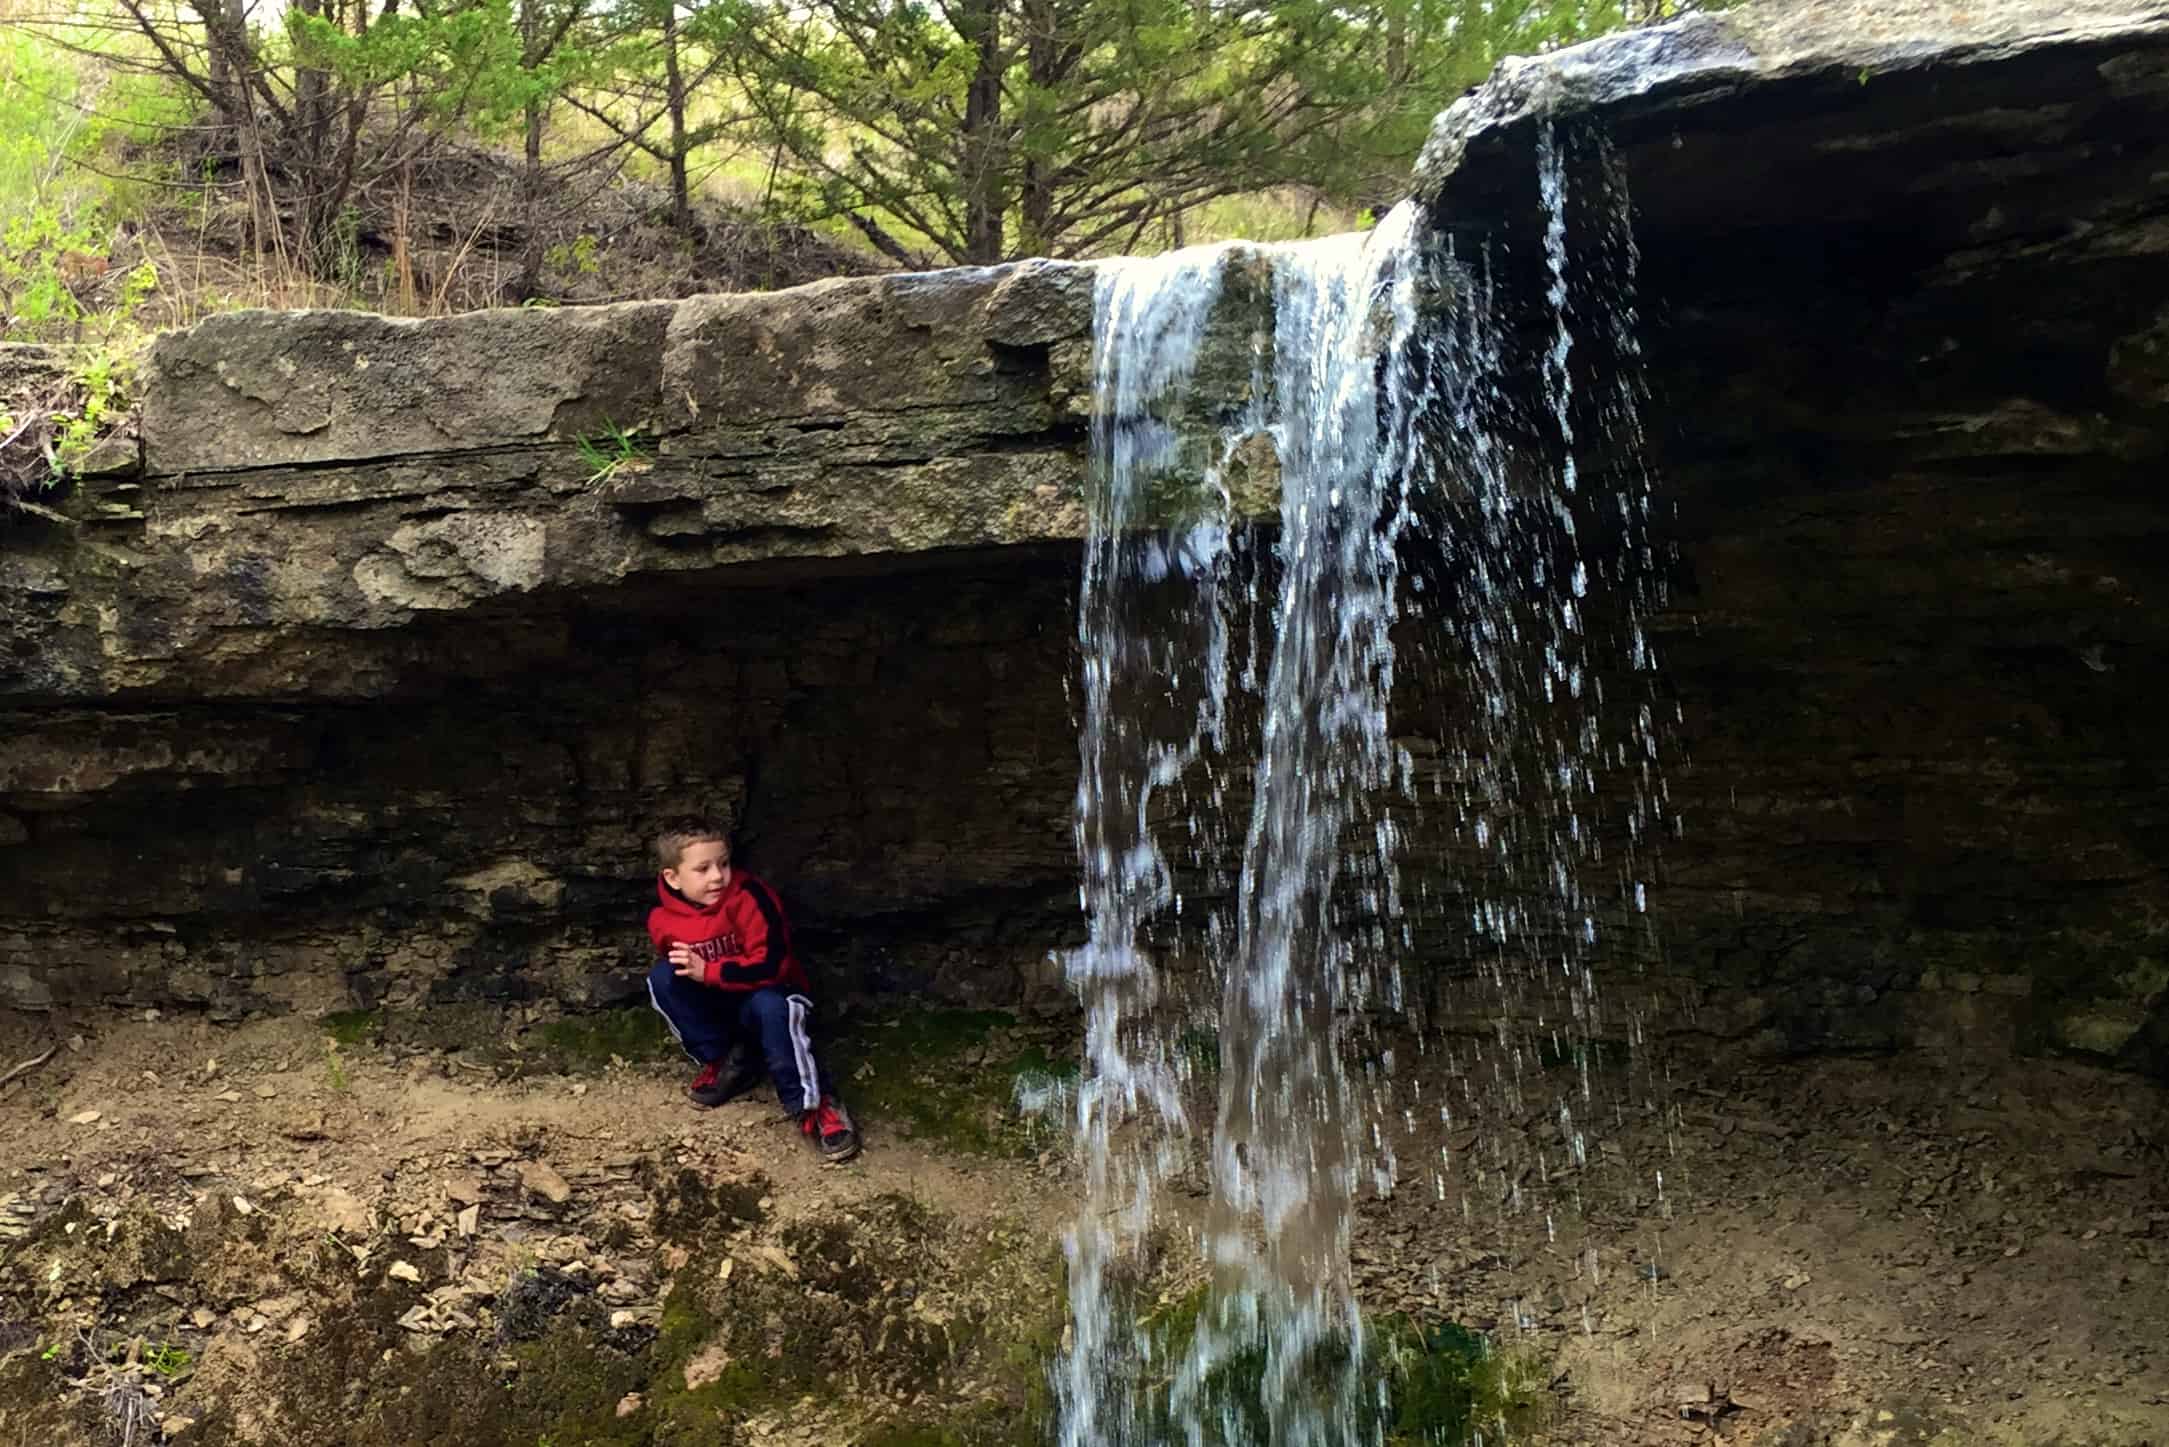 A small waterfall flows over a rock and a boy sits underneath it.